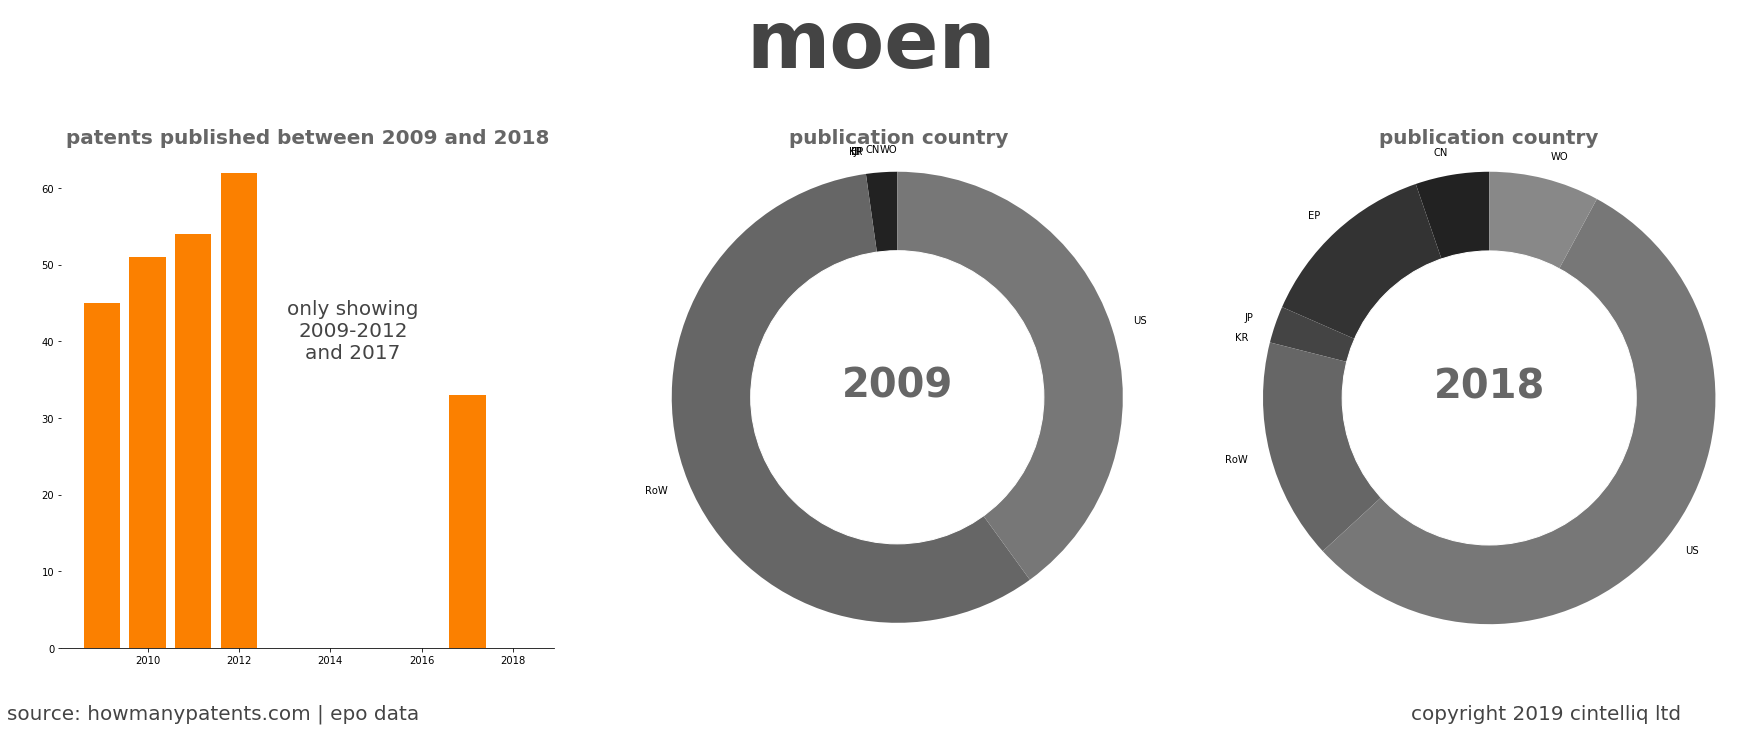 summary of patents for Moen